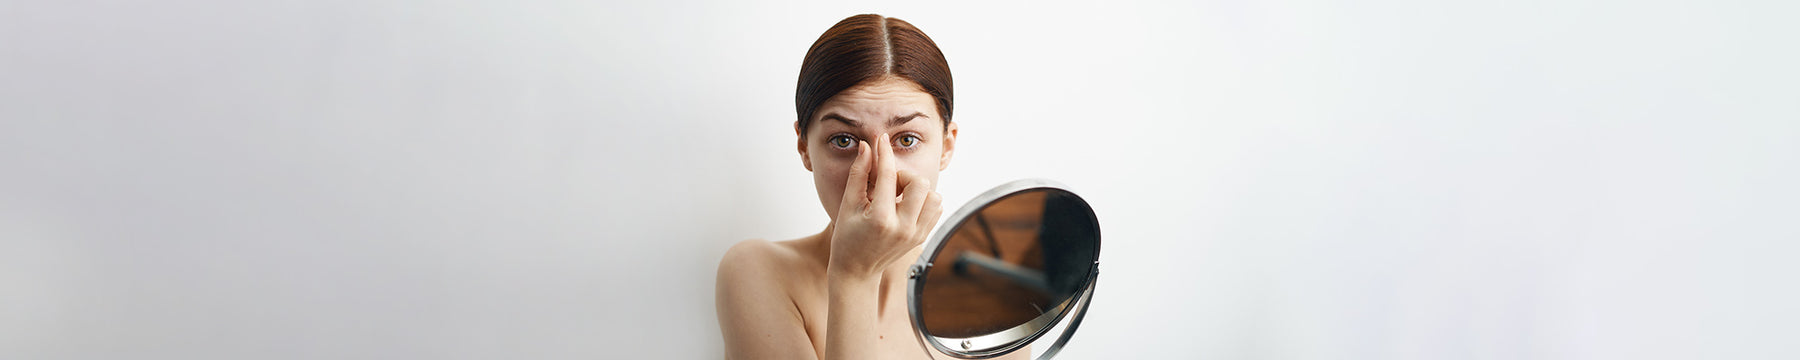 Clogged Pores on Nose - Important Things You Should be Aware Of